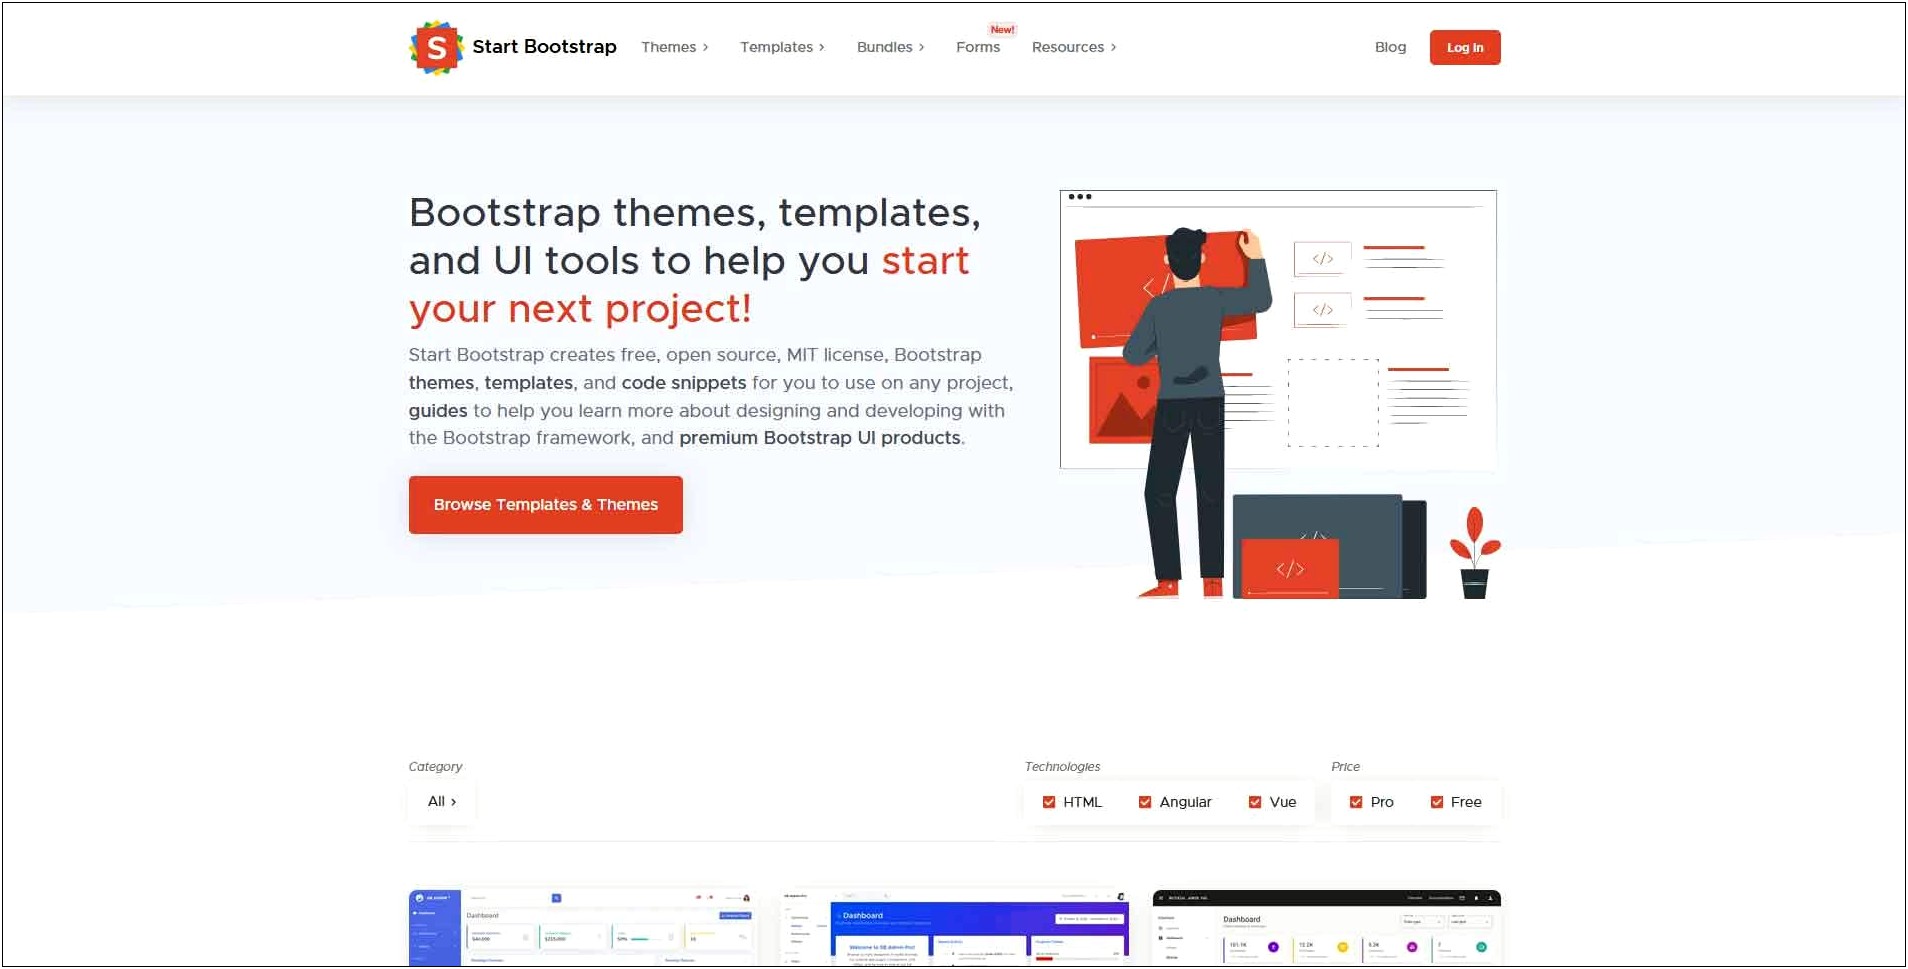 Free Download Premium Template From Wrapbootstrap